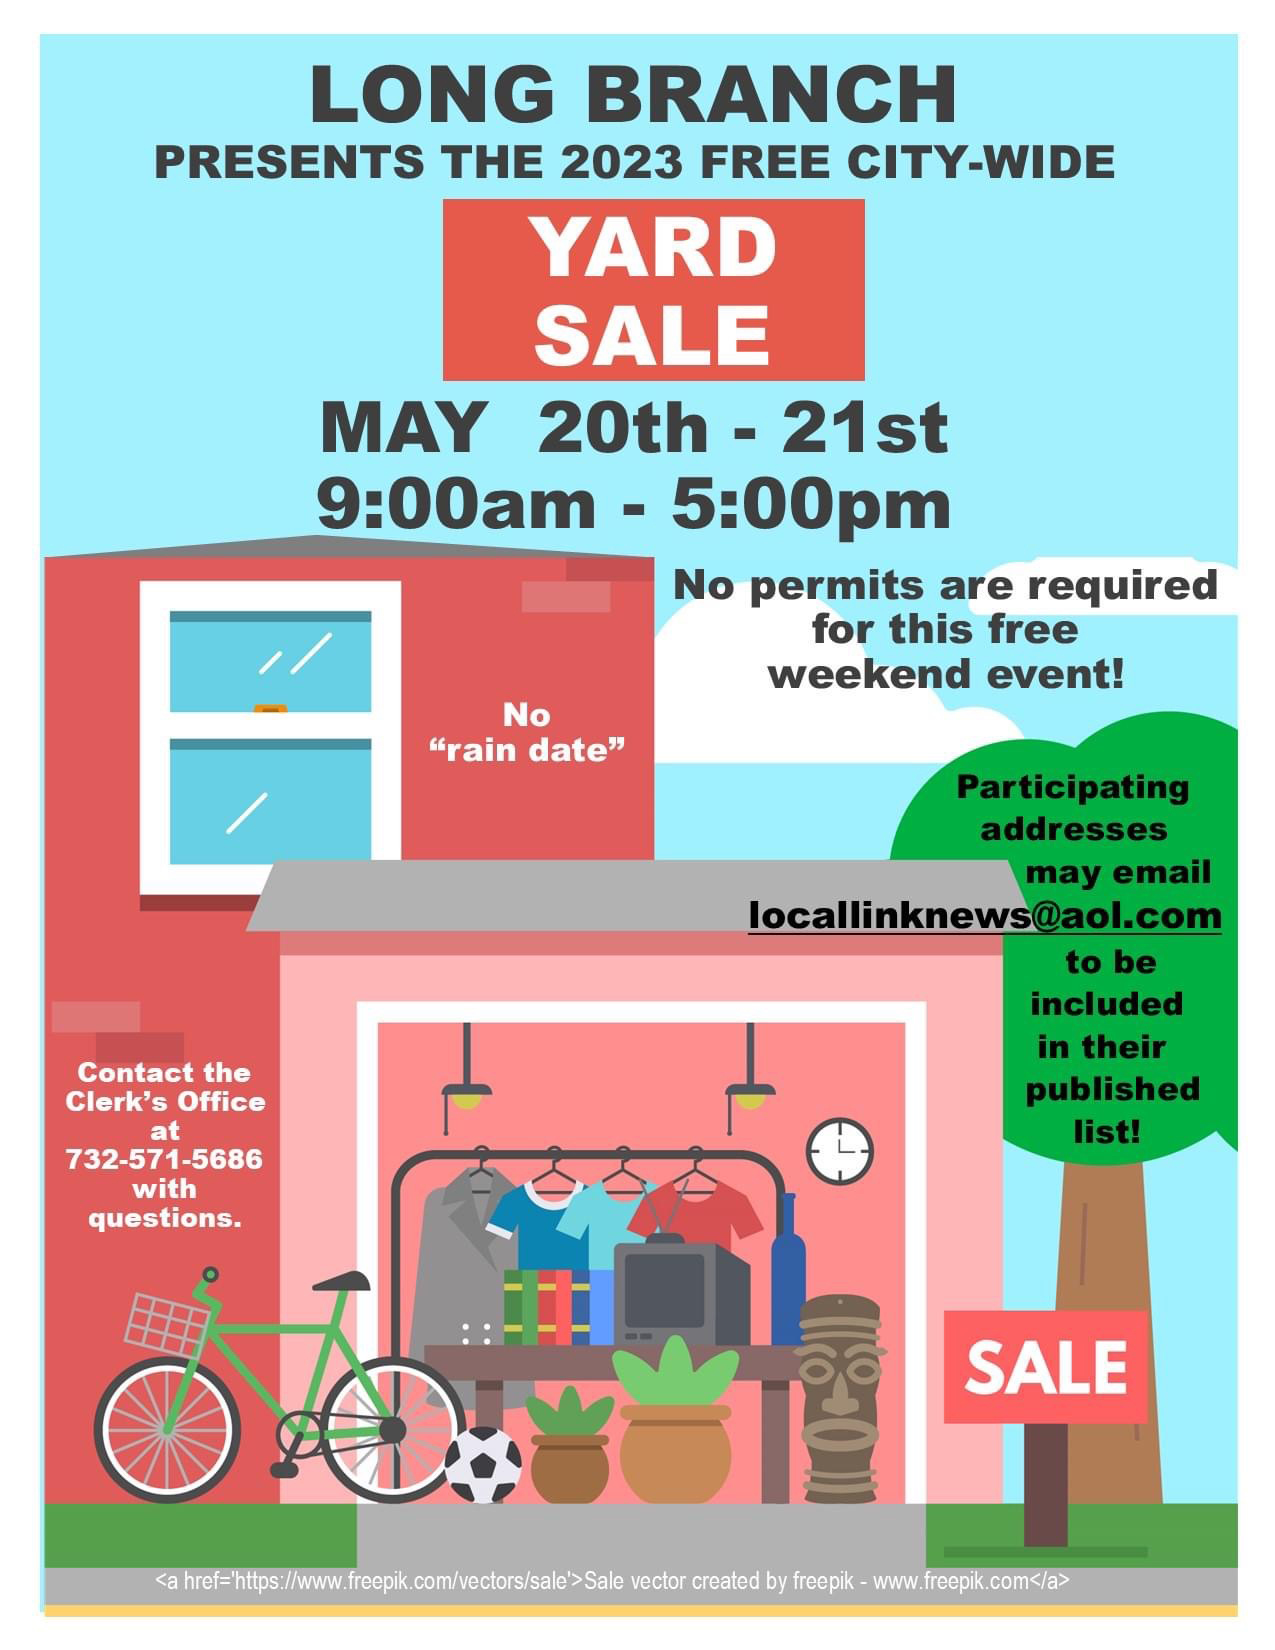 Yard Sale Weekend coming up in Long Branch – The Link News